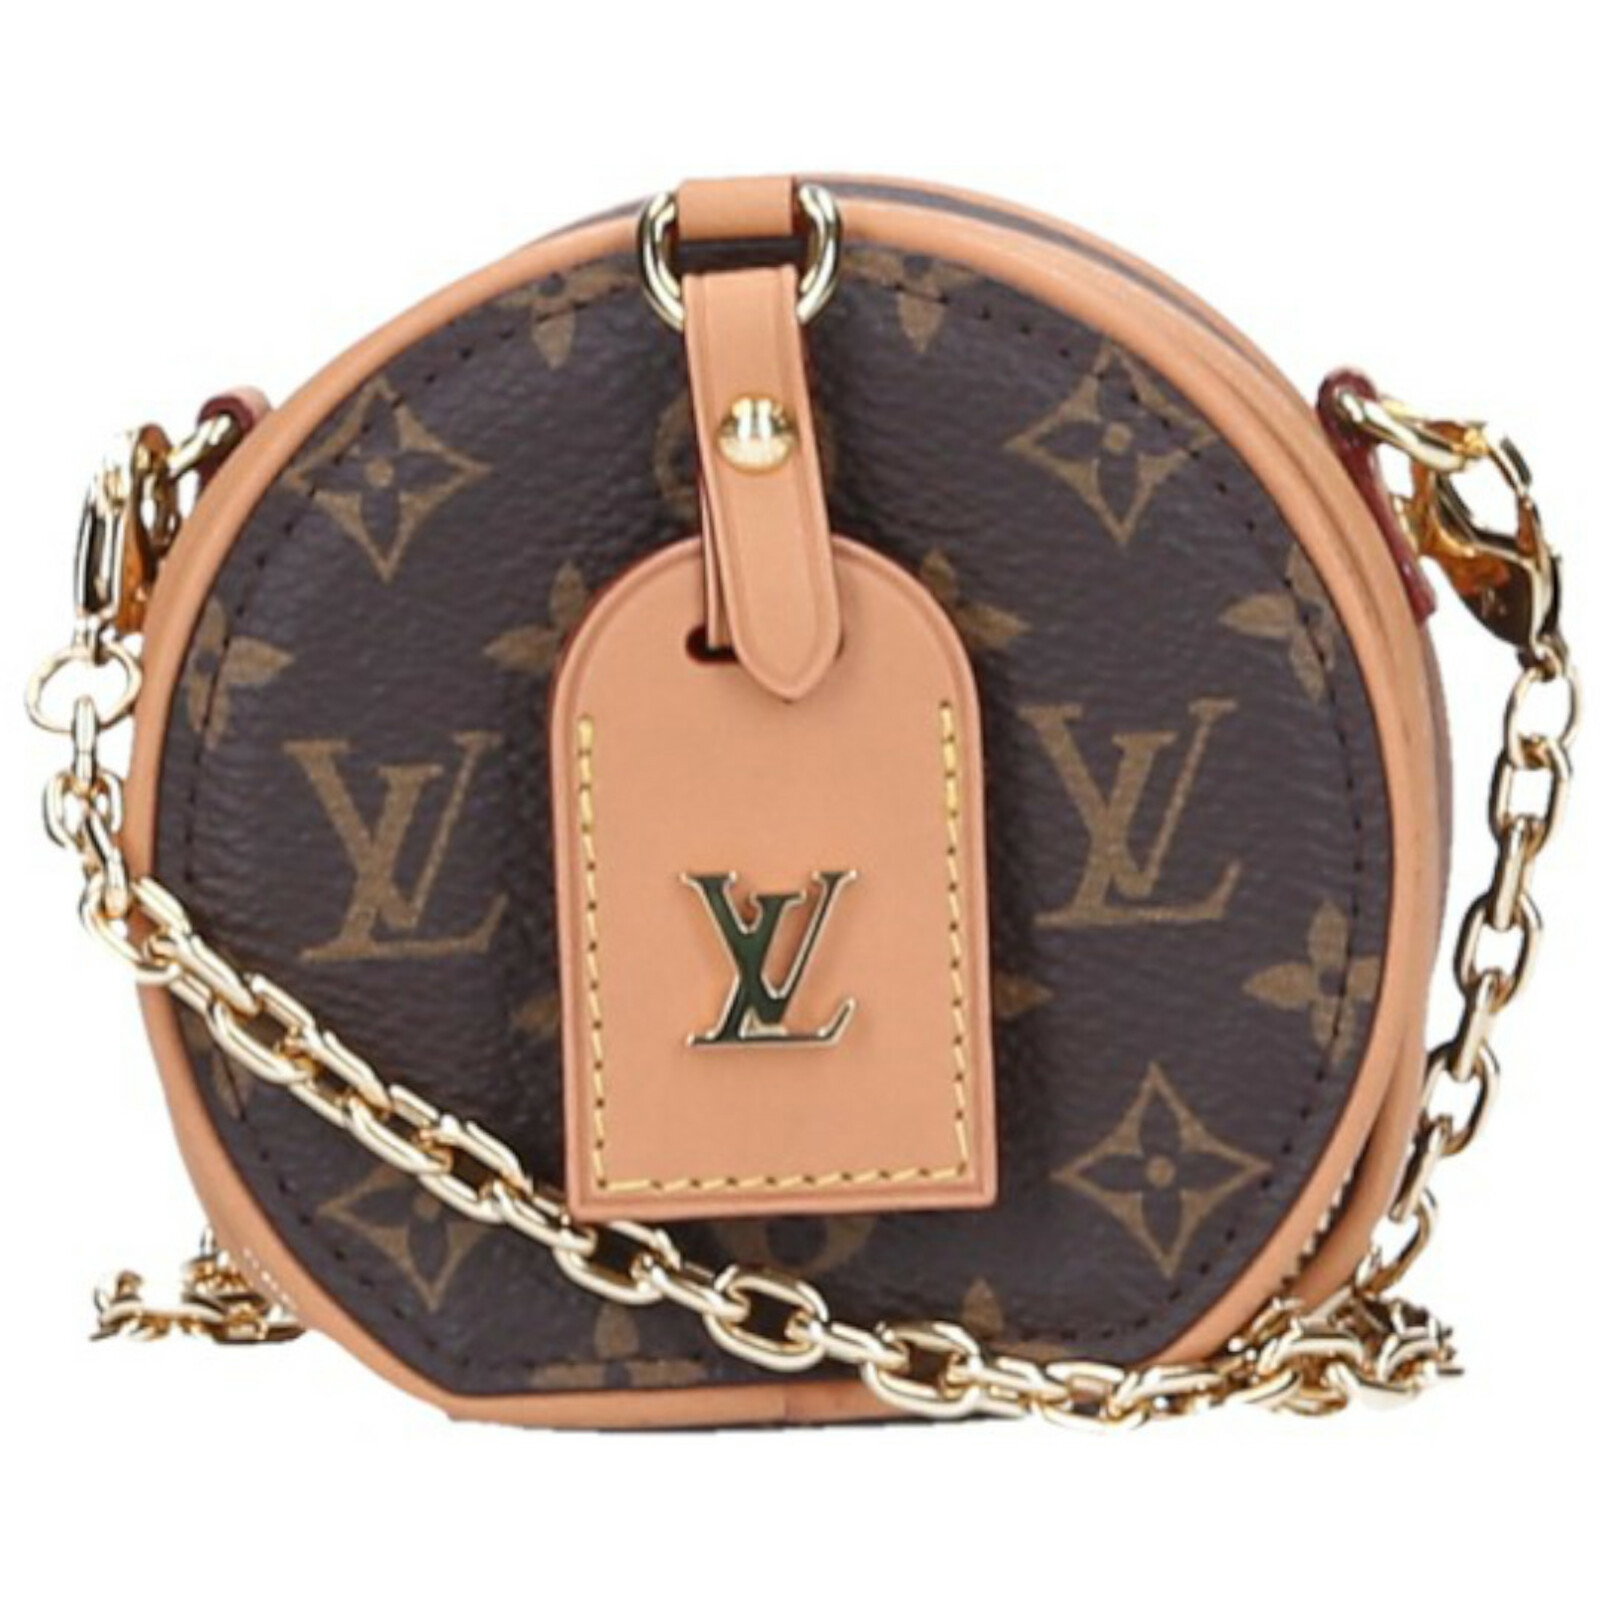 LOUIS VUITTON: Iconic bags and design classics from Paris! - Rebelle